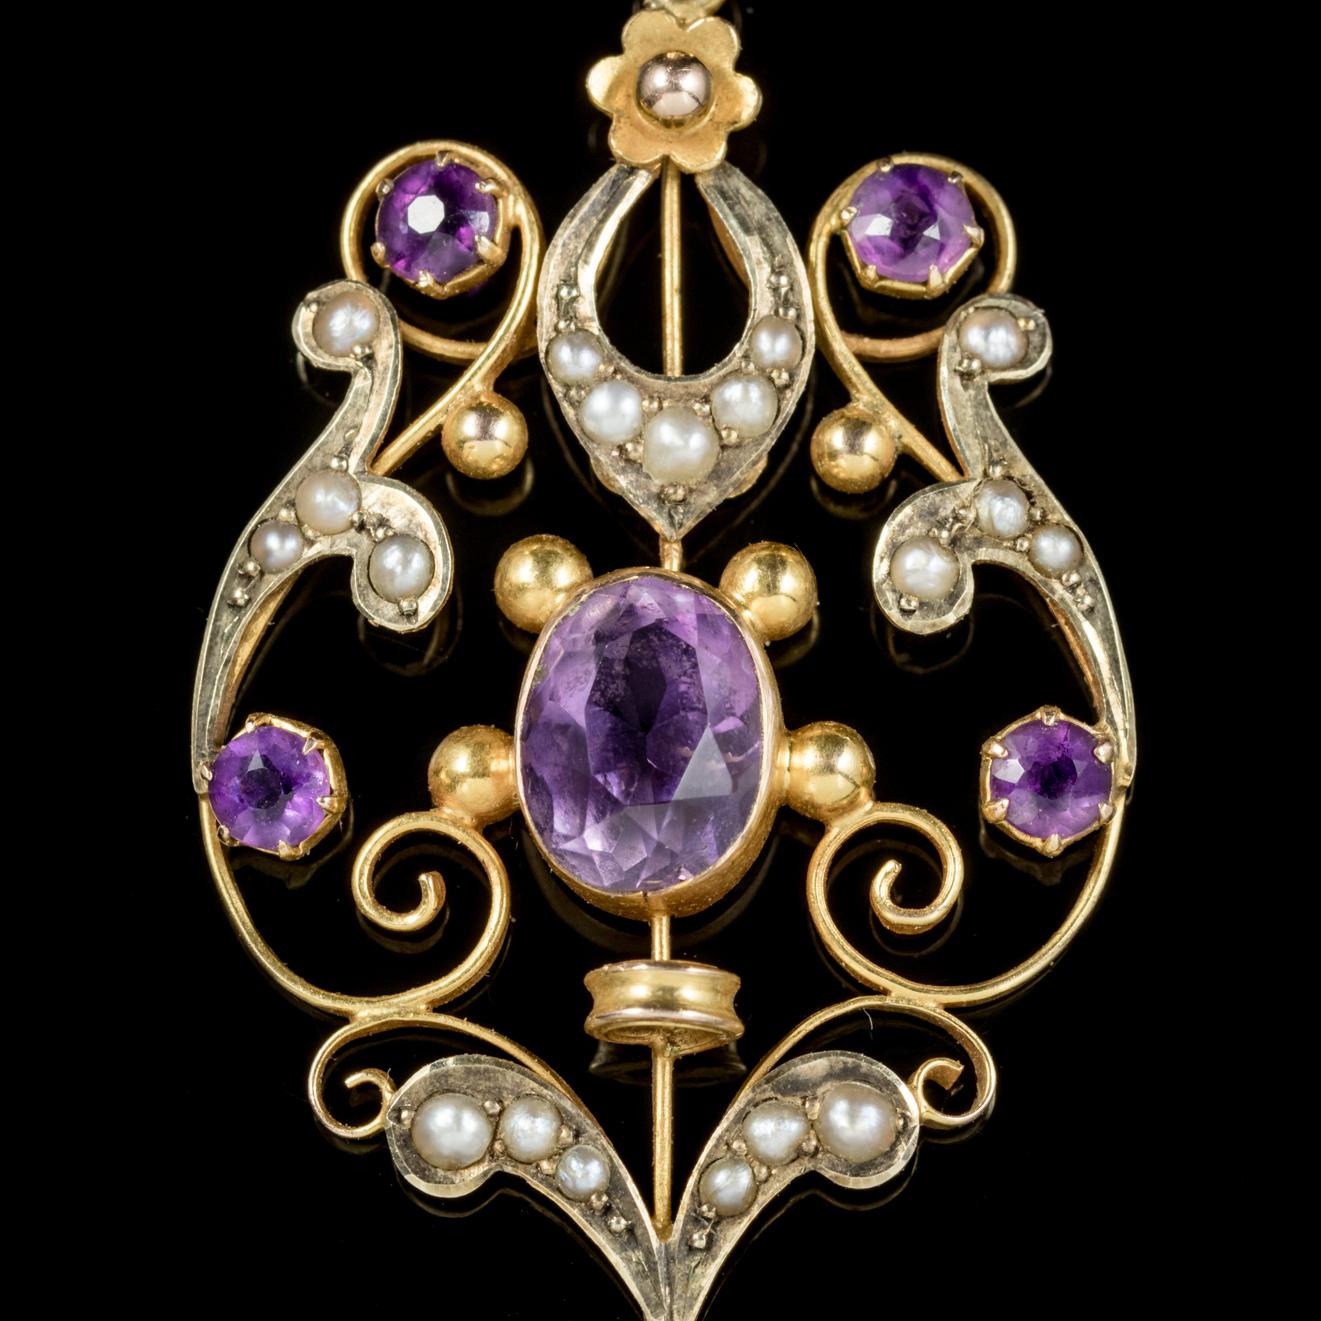 This lovely antique Amethyst and Pearl pendant is from the Victorian era, Circa 1900. 

The beautiful piece is decorated in creamy Pearls and beautiful purple Amethyst’s including a small Amethyst dropper hanging below. 

Amethyst has been highly